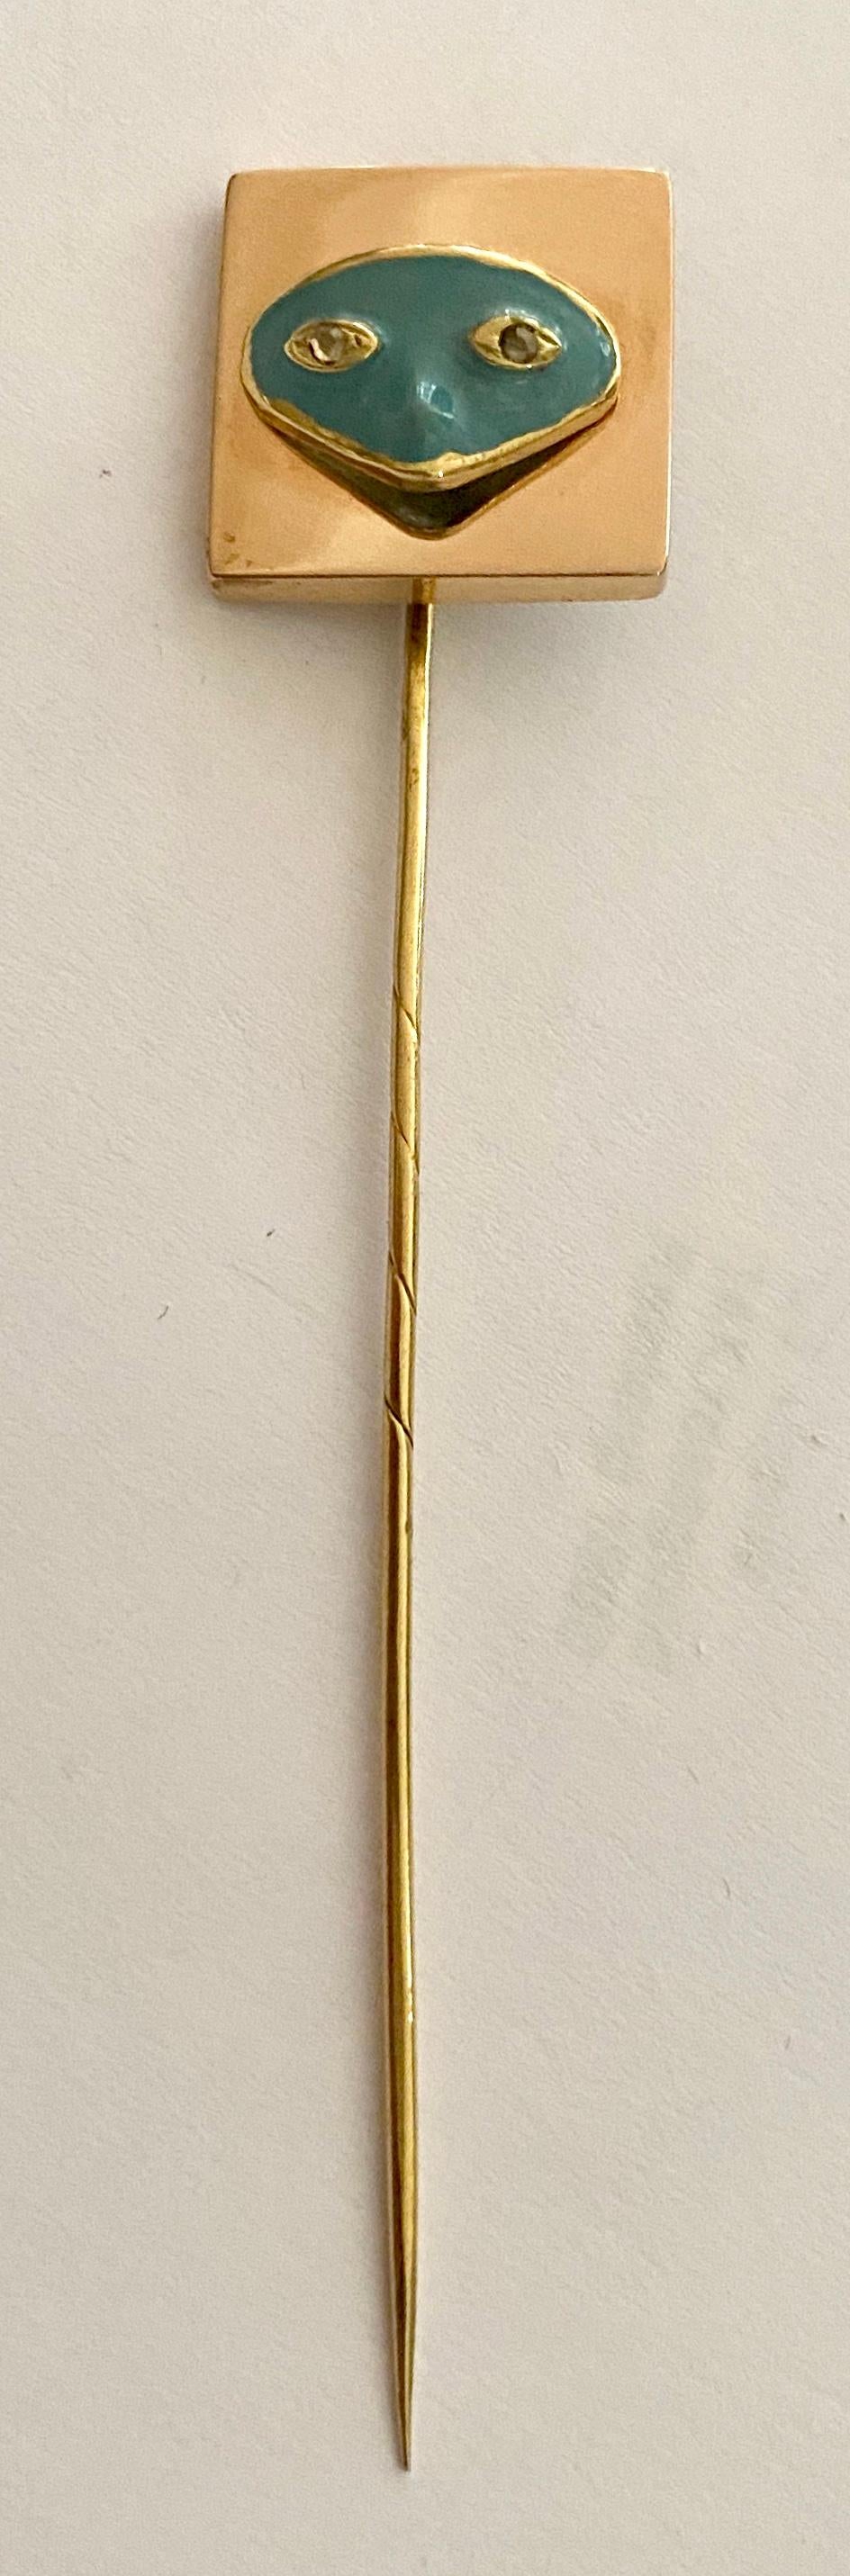 An 18K. Yellow Gold Stickpin; enamel mask mounted on gold plate.
England ca 1900.
weight: 3.28 grams.
size: 17 x 16 x 6 mm. length of the pin: 80 mm.
Comes with a certificate from AIG Belgium and with an original stickpin box.

In the 19th century